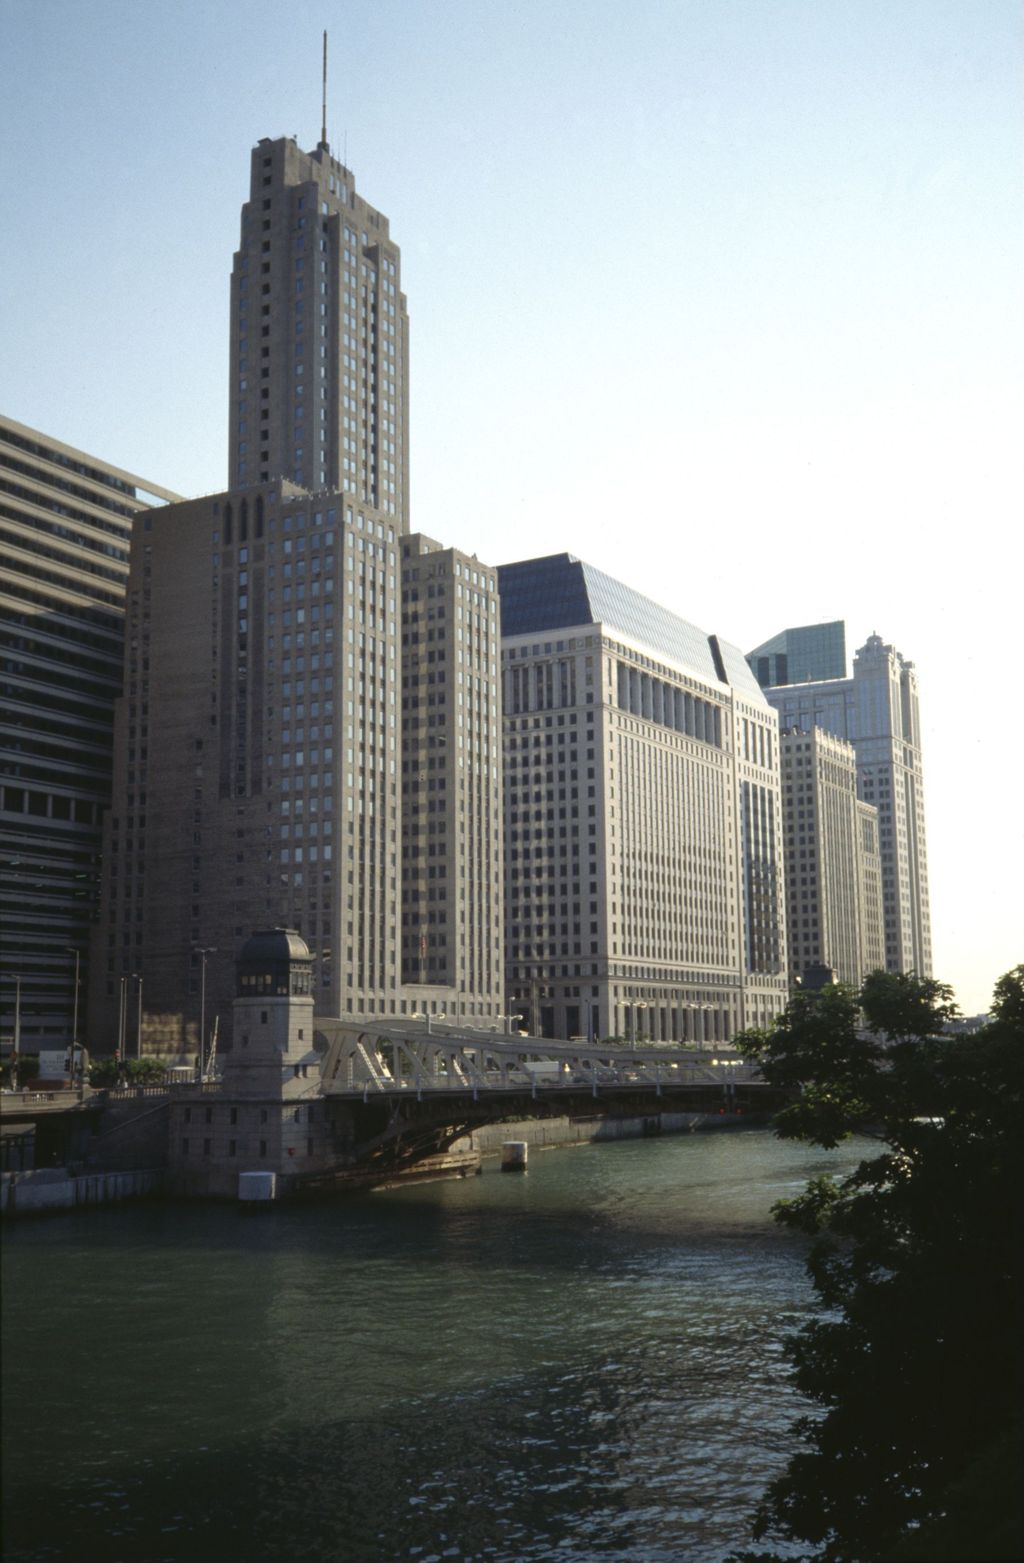 Miniature of West Wacker Drive and Chicago River